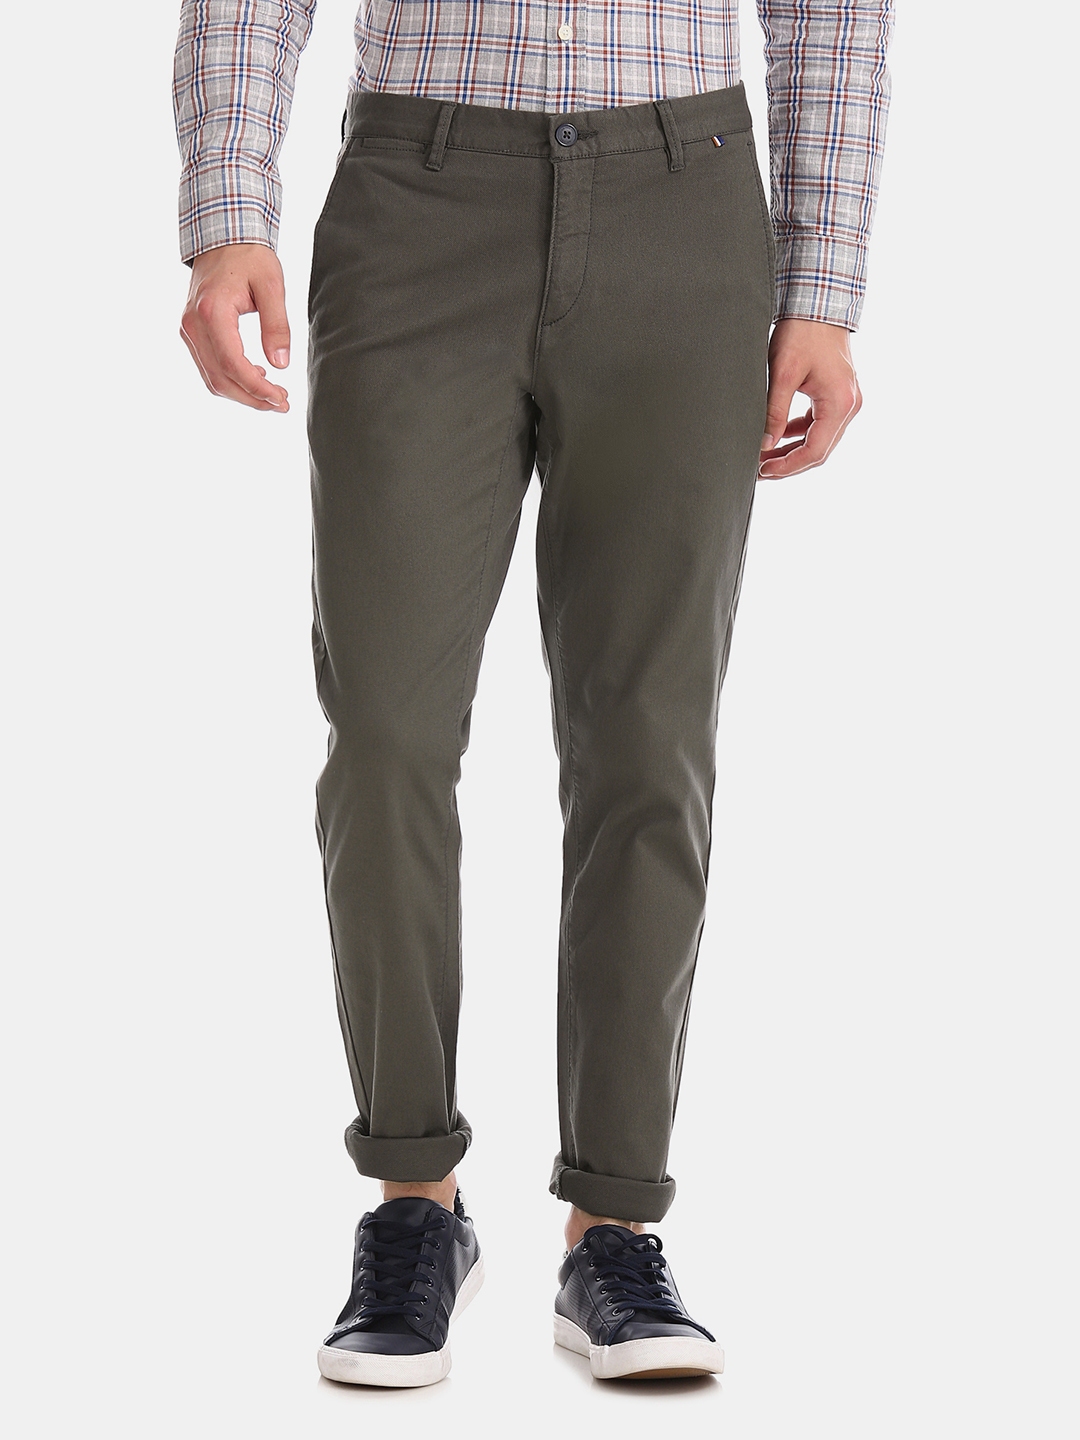 Buy U.S. Polo Assn. Men Olive Green Slim Fit Solid Regular Trousers ...